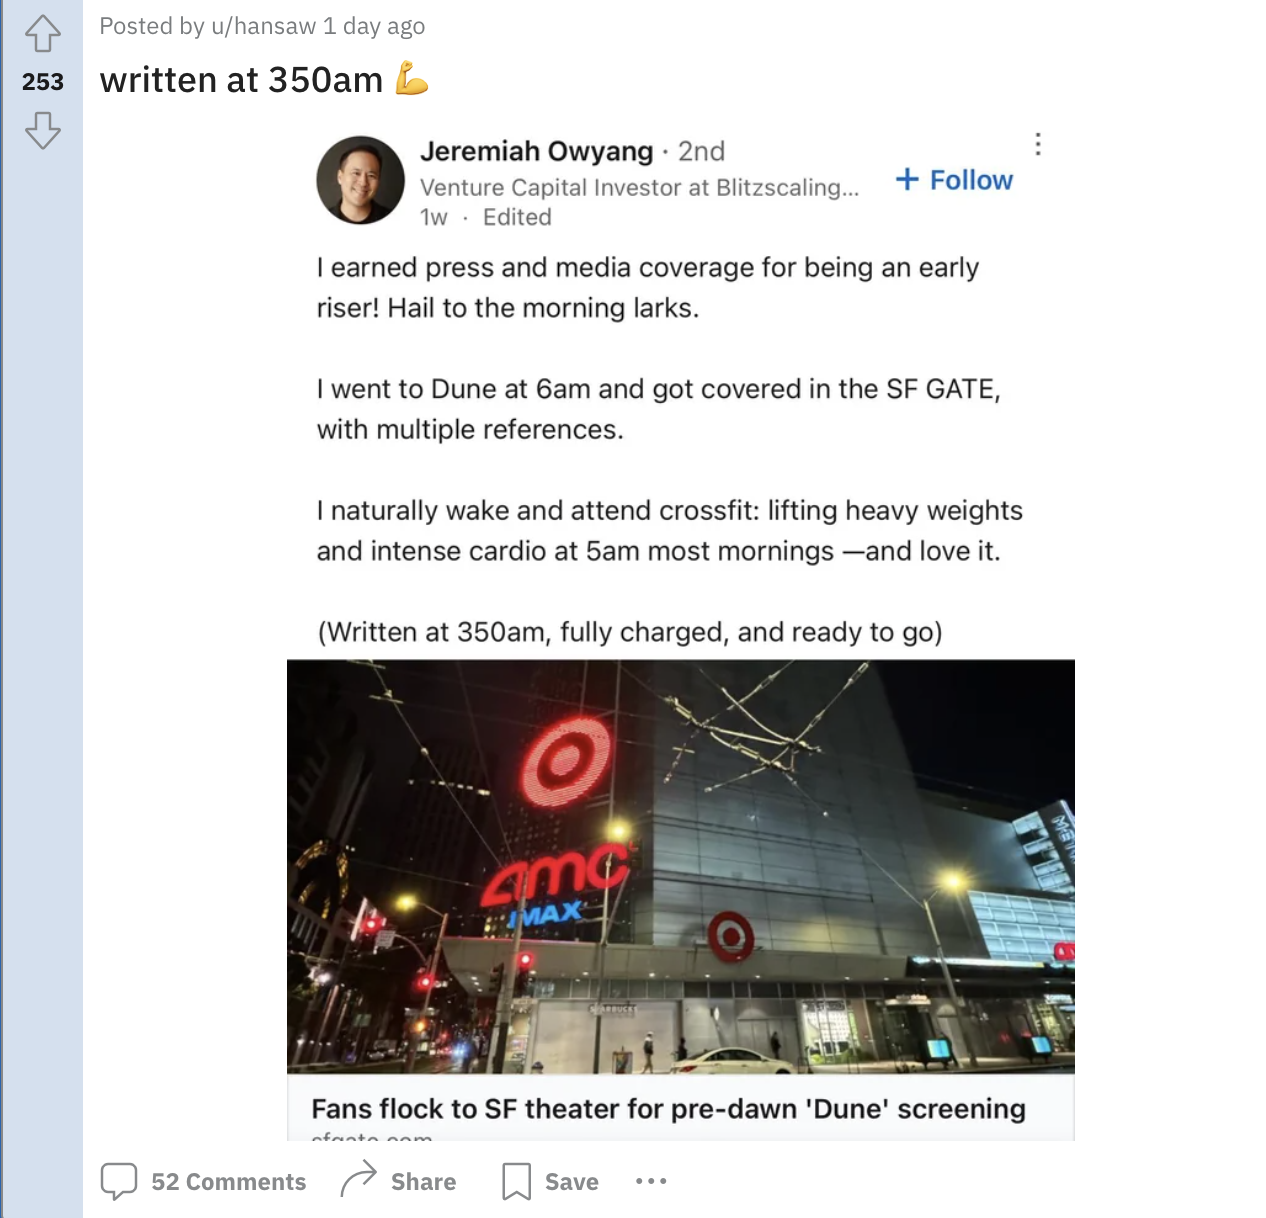 screenshot - Posted by uhansaw 1 day ago 253 written at 350am Jeremiah Owyang 2nd Venture Capital Investor at Blitzscaling... 1w Edited I earned press and media coverage for being an early riser! Hail to the morning larks. I went to Dune at 6am and got co